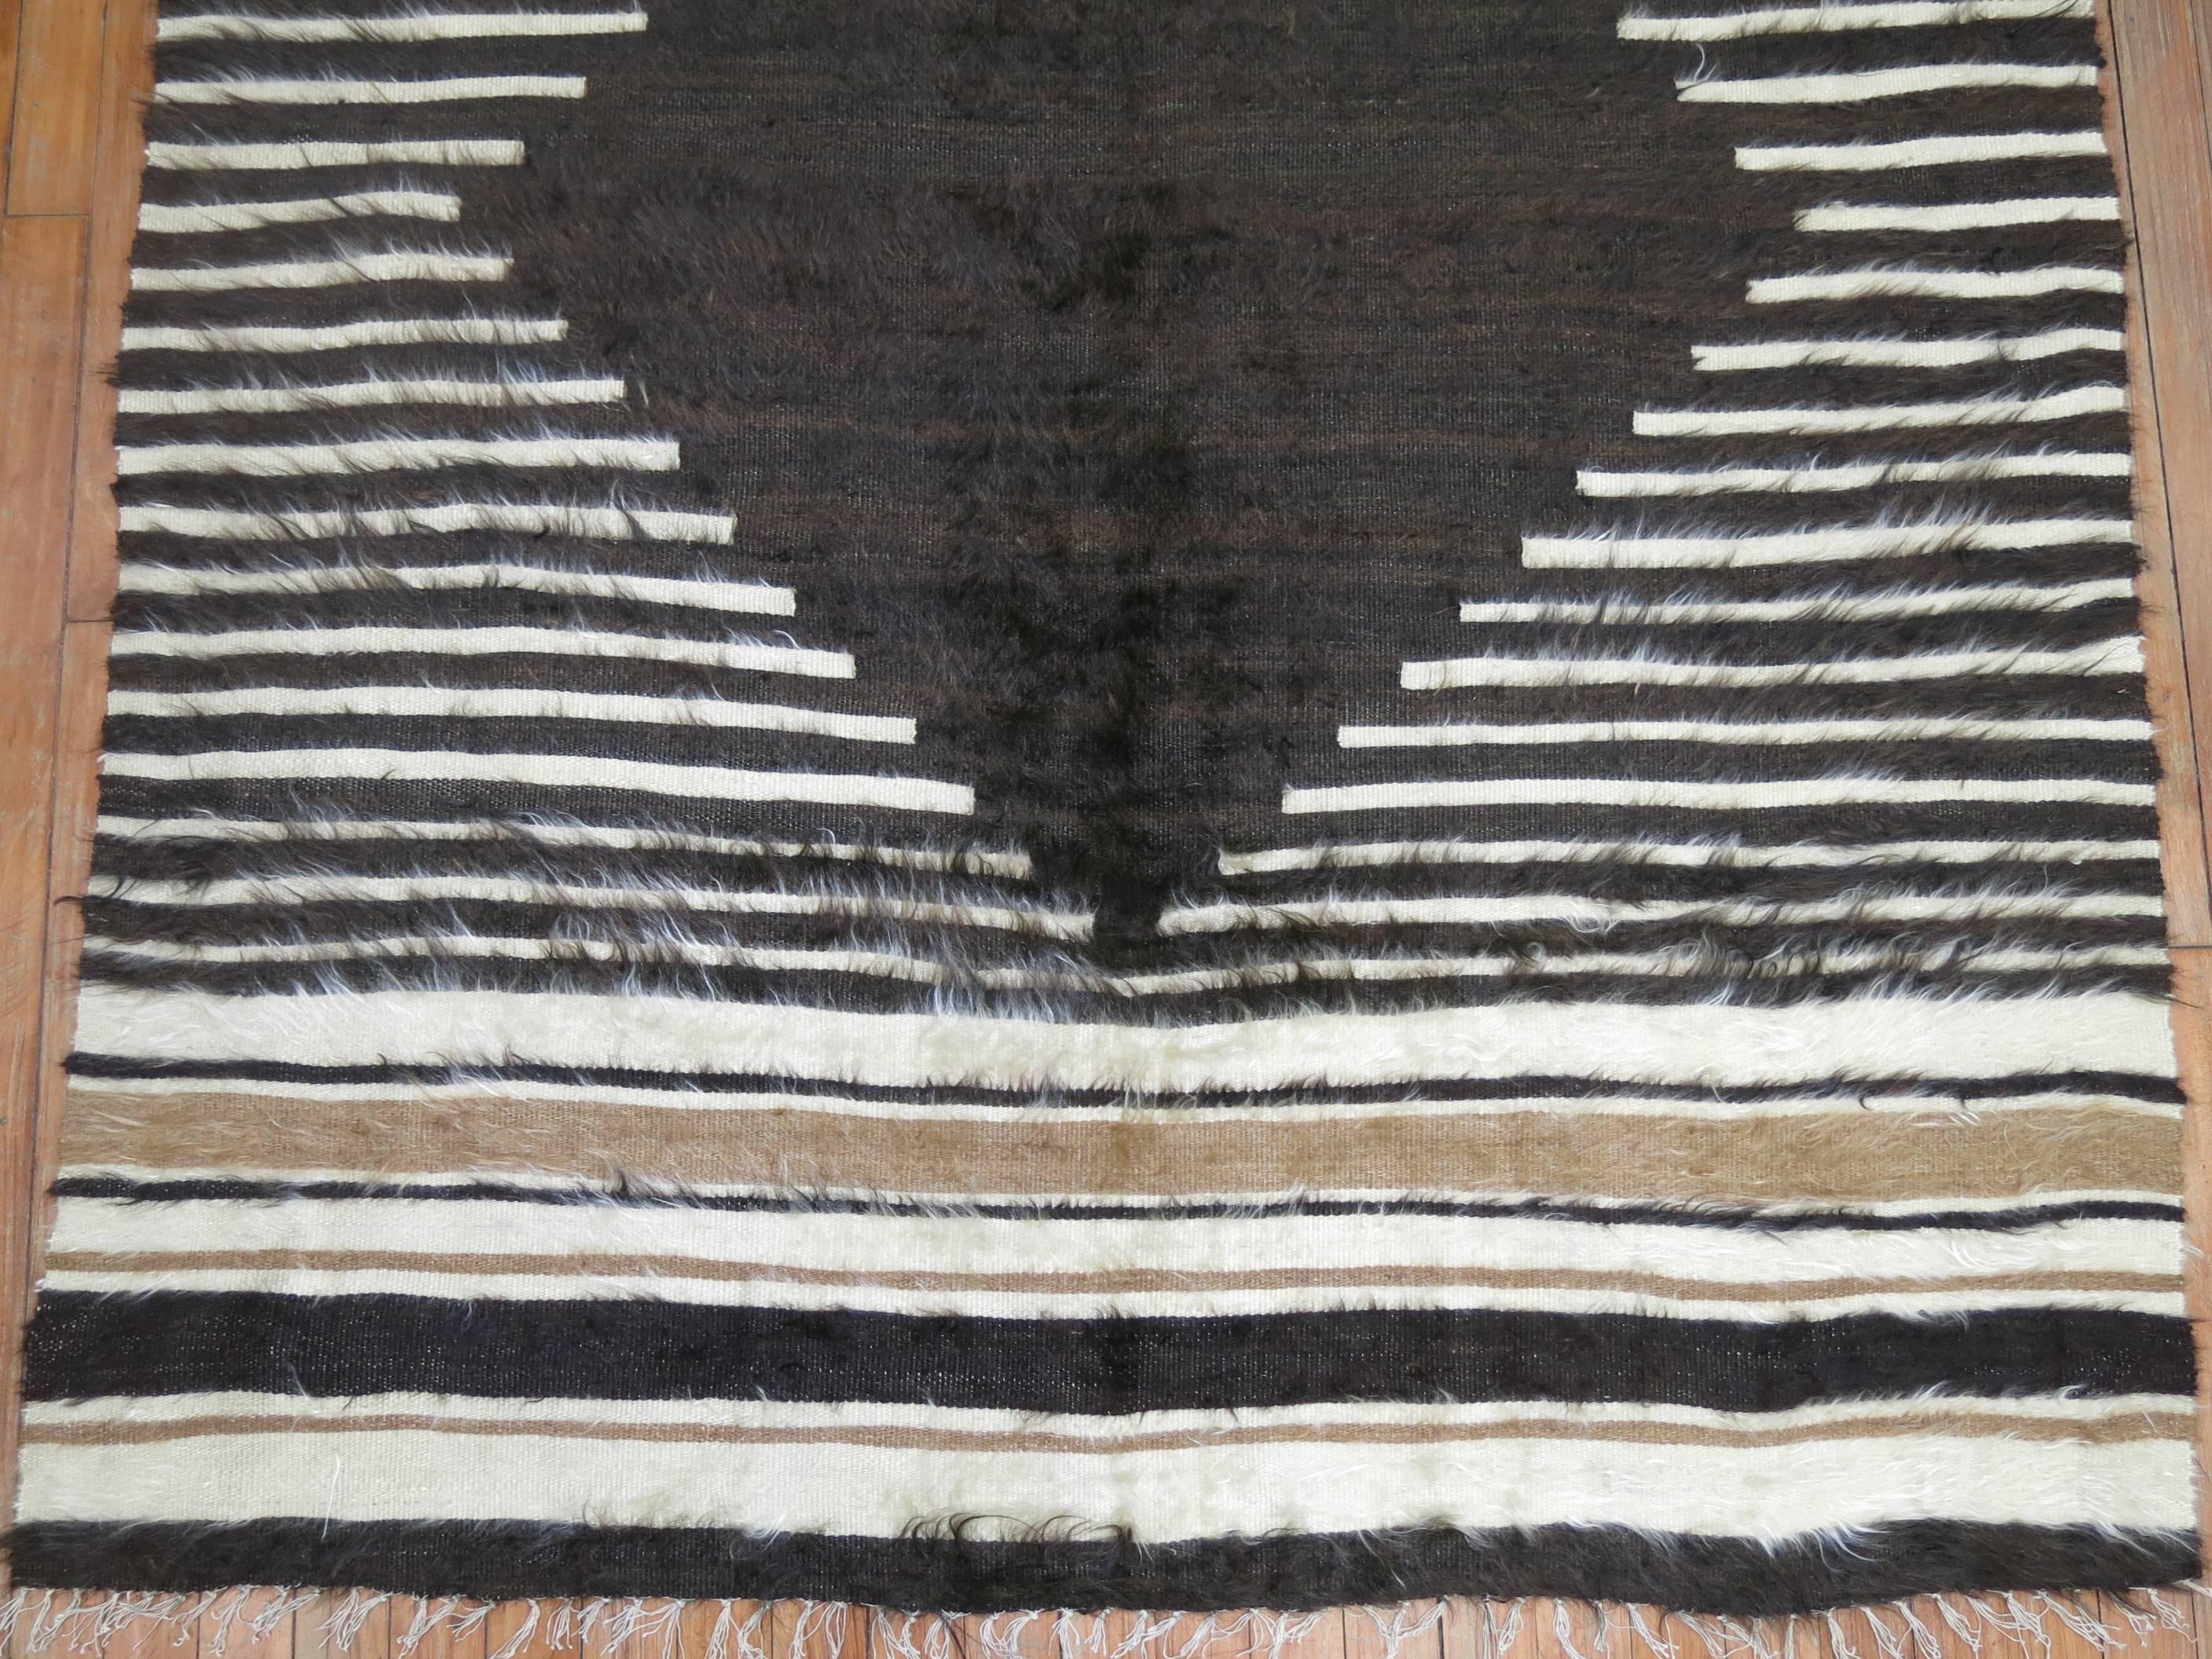 A mid-20th century one of a kind Turkish Sirt rug woven with mohair wool. These pieces are inspired by traditional tribal weaving's but they are used mostly for decorative purposes and have a strong modernist appeal. The unique pile technique adds a